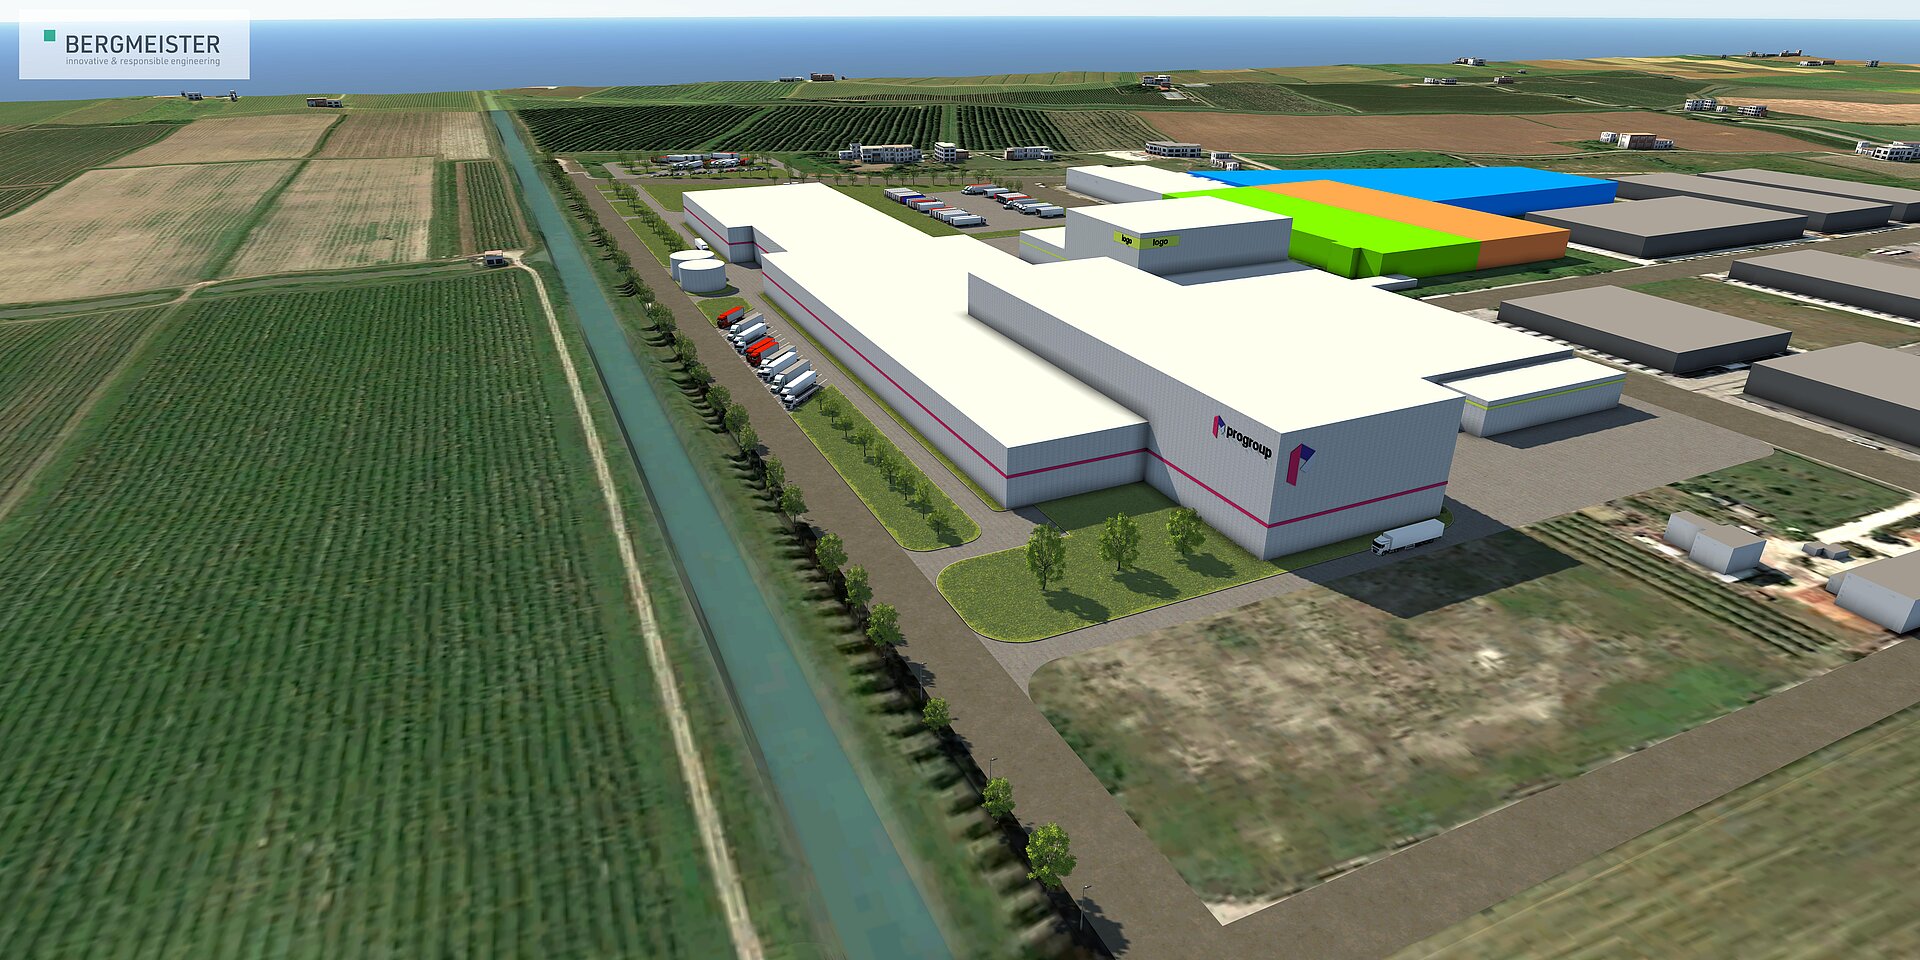 Progroup will be investing more than 100 million euros in the plant and creating around 65 new jobs. Visualisation: Bergmeister